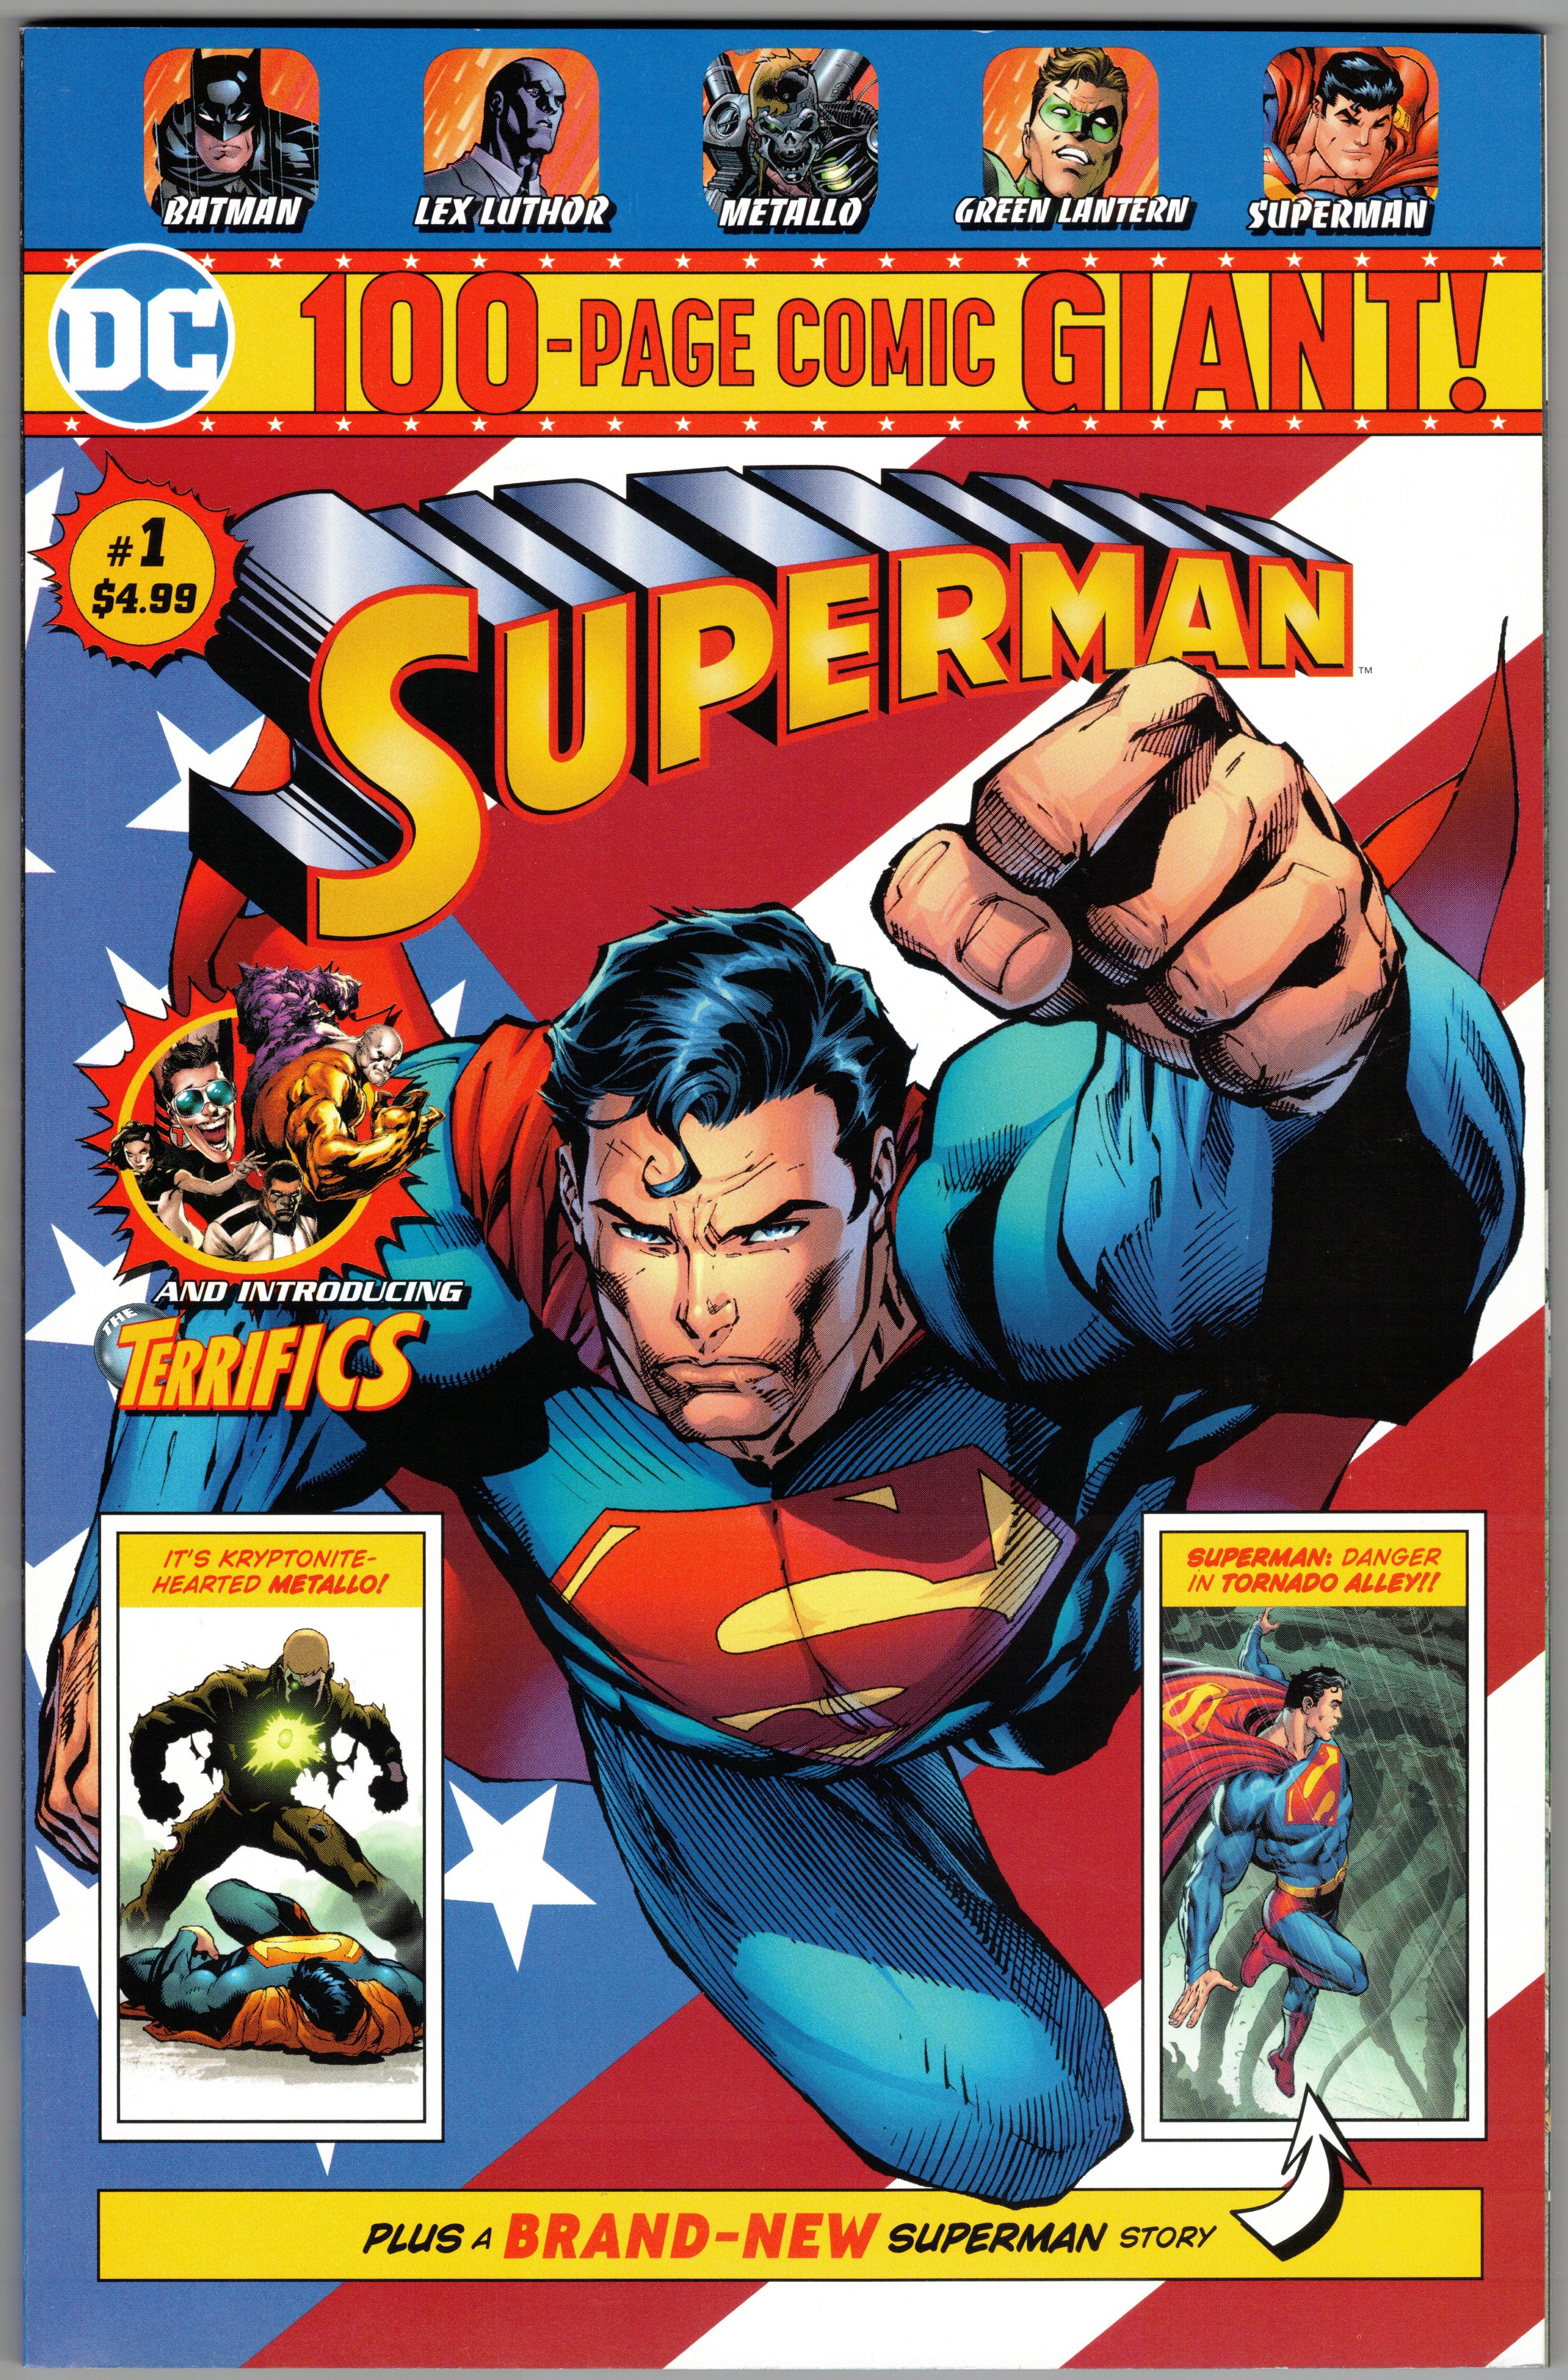 Photo of Superman 100-Page Giant, Vol. 1 (2018) Issue 1 - Near Mint Comic sold by Stronghold Collectibles